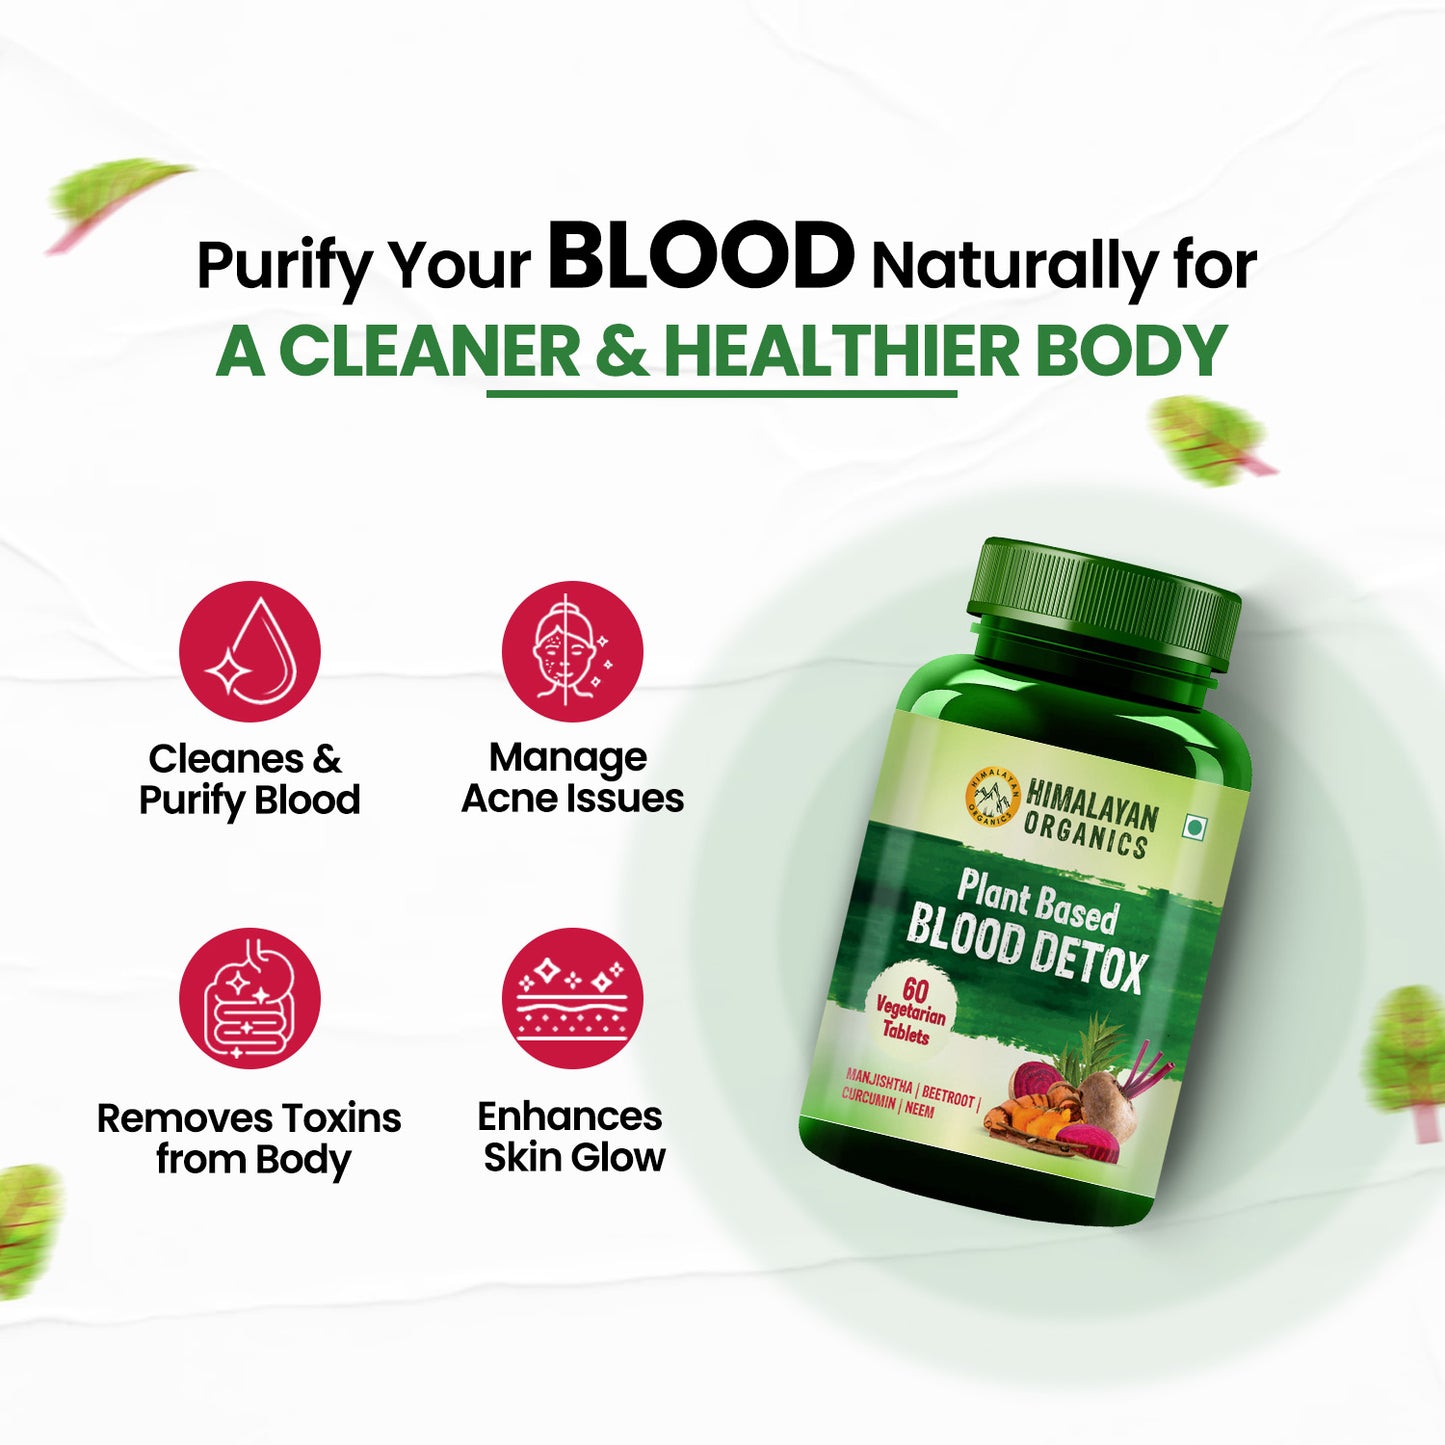 Himalayan Organics Blood Detox | Beetroot Curcumin Manjistha Extracts | Pimple & Acne Control | Natural Purifier & Cleanser – 60 Tablets